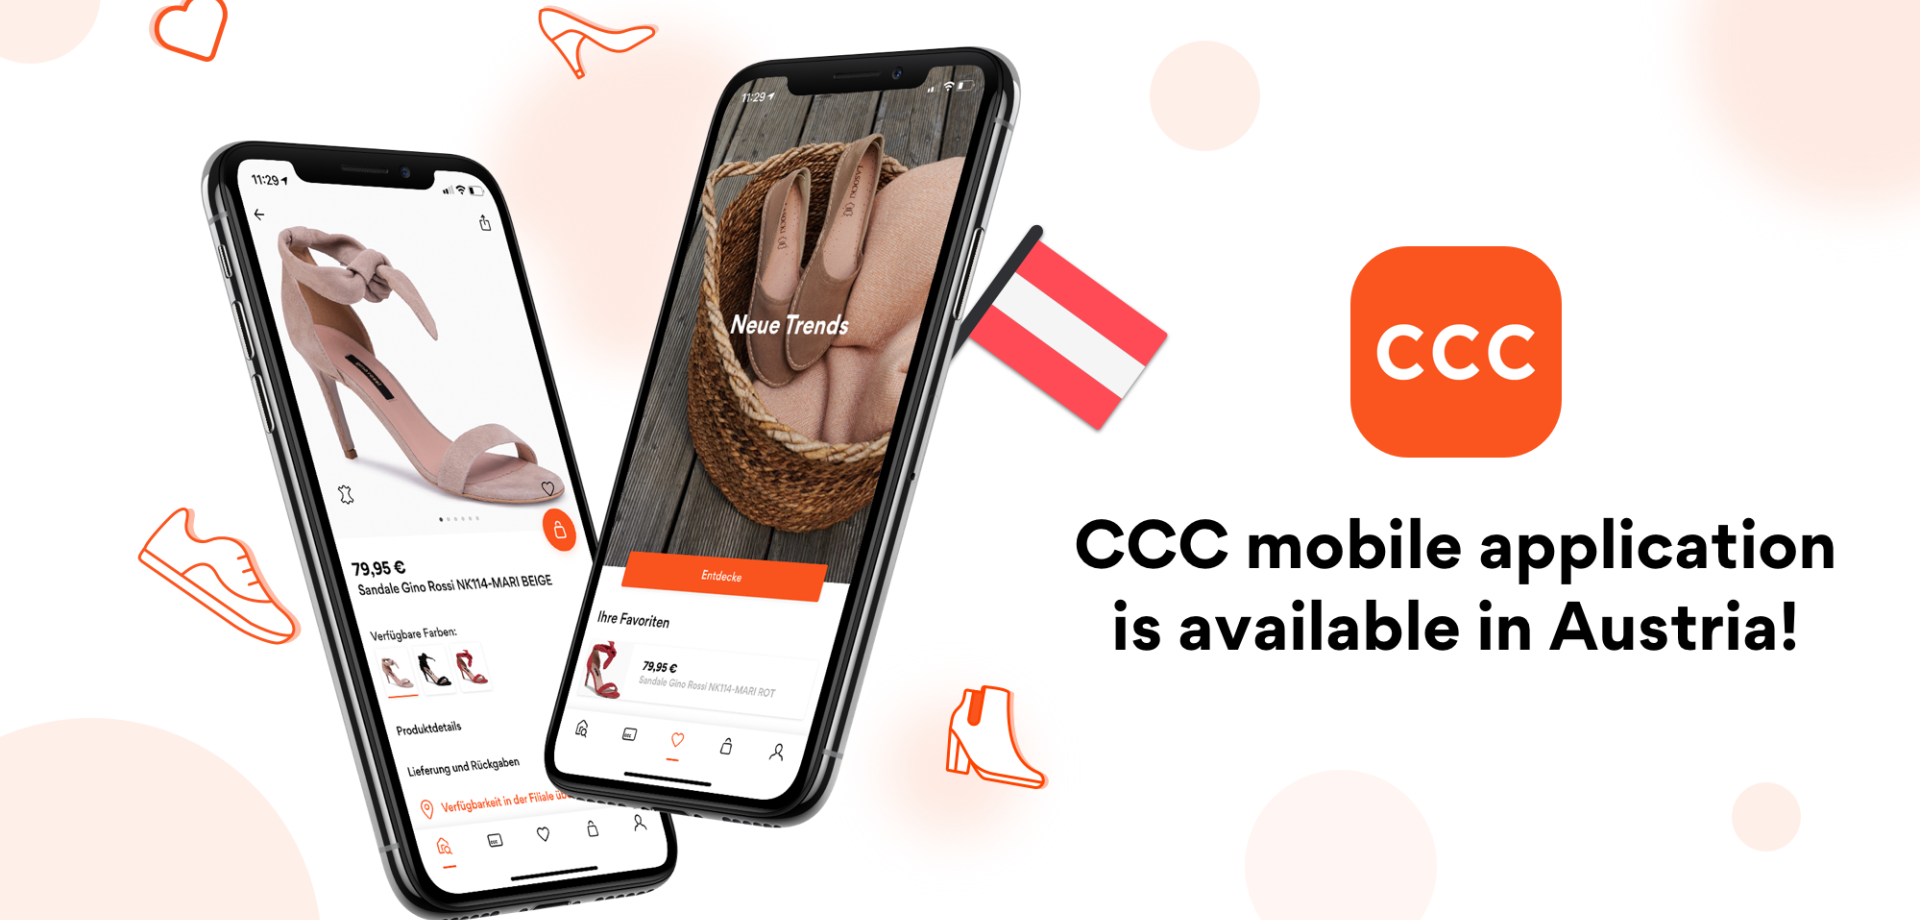 CCC MOBILE APPLICATION ALREADY AVAILABLE IN AUSTRIA